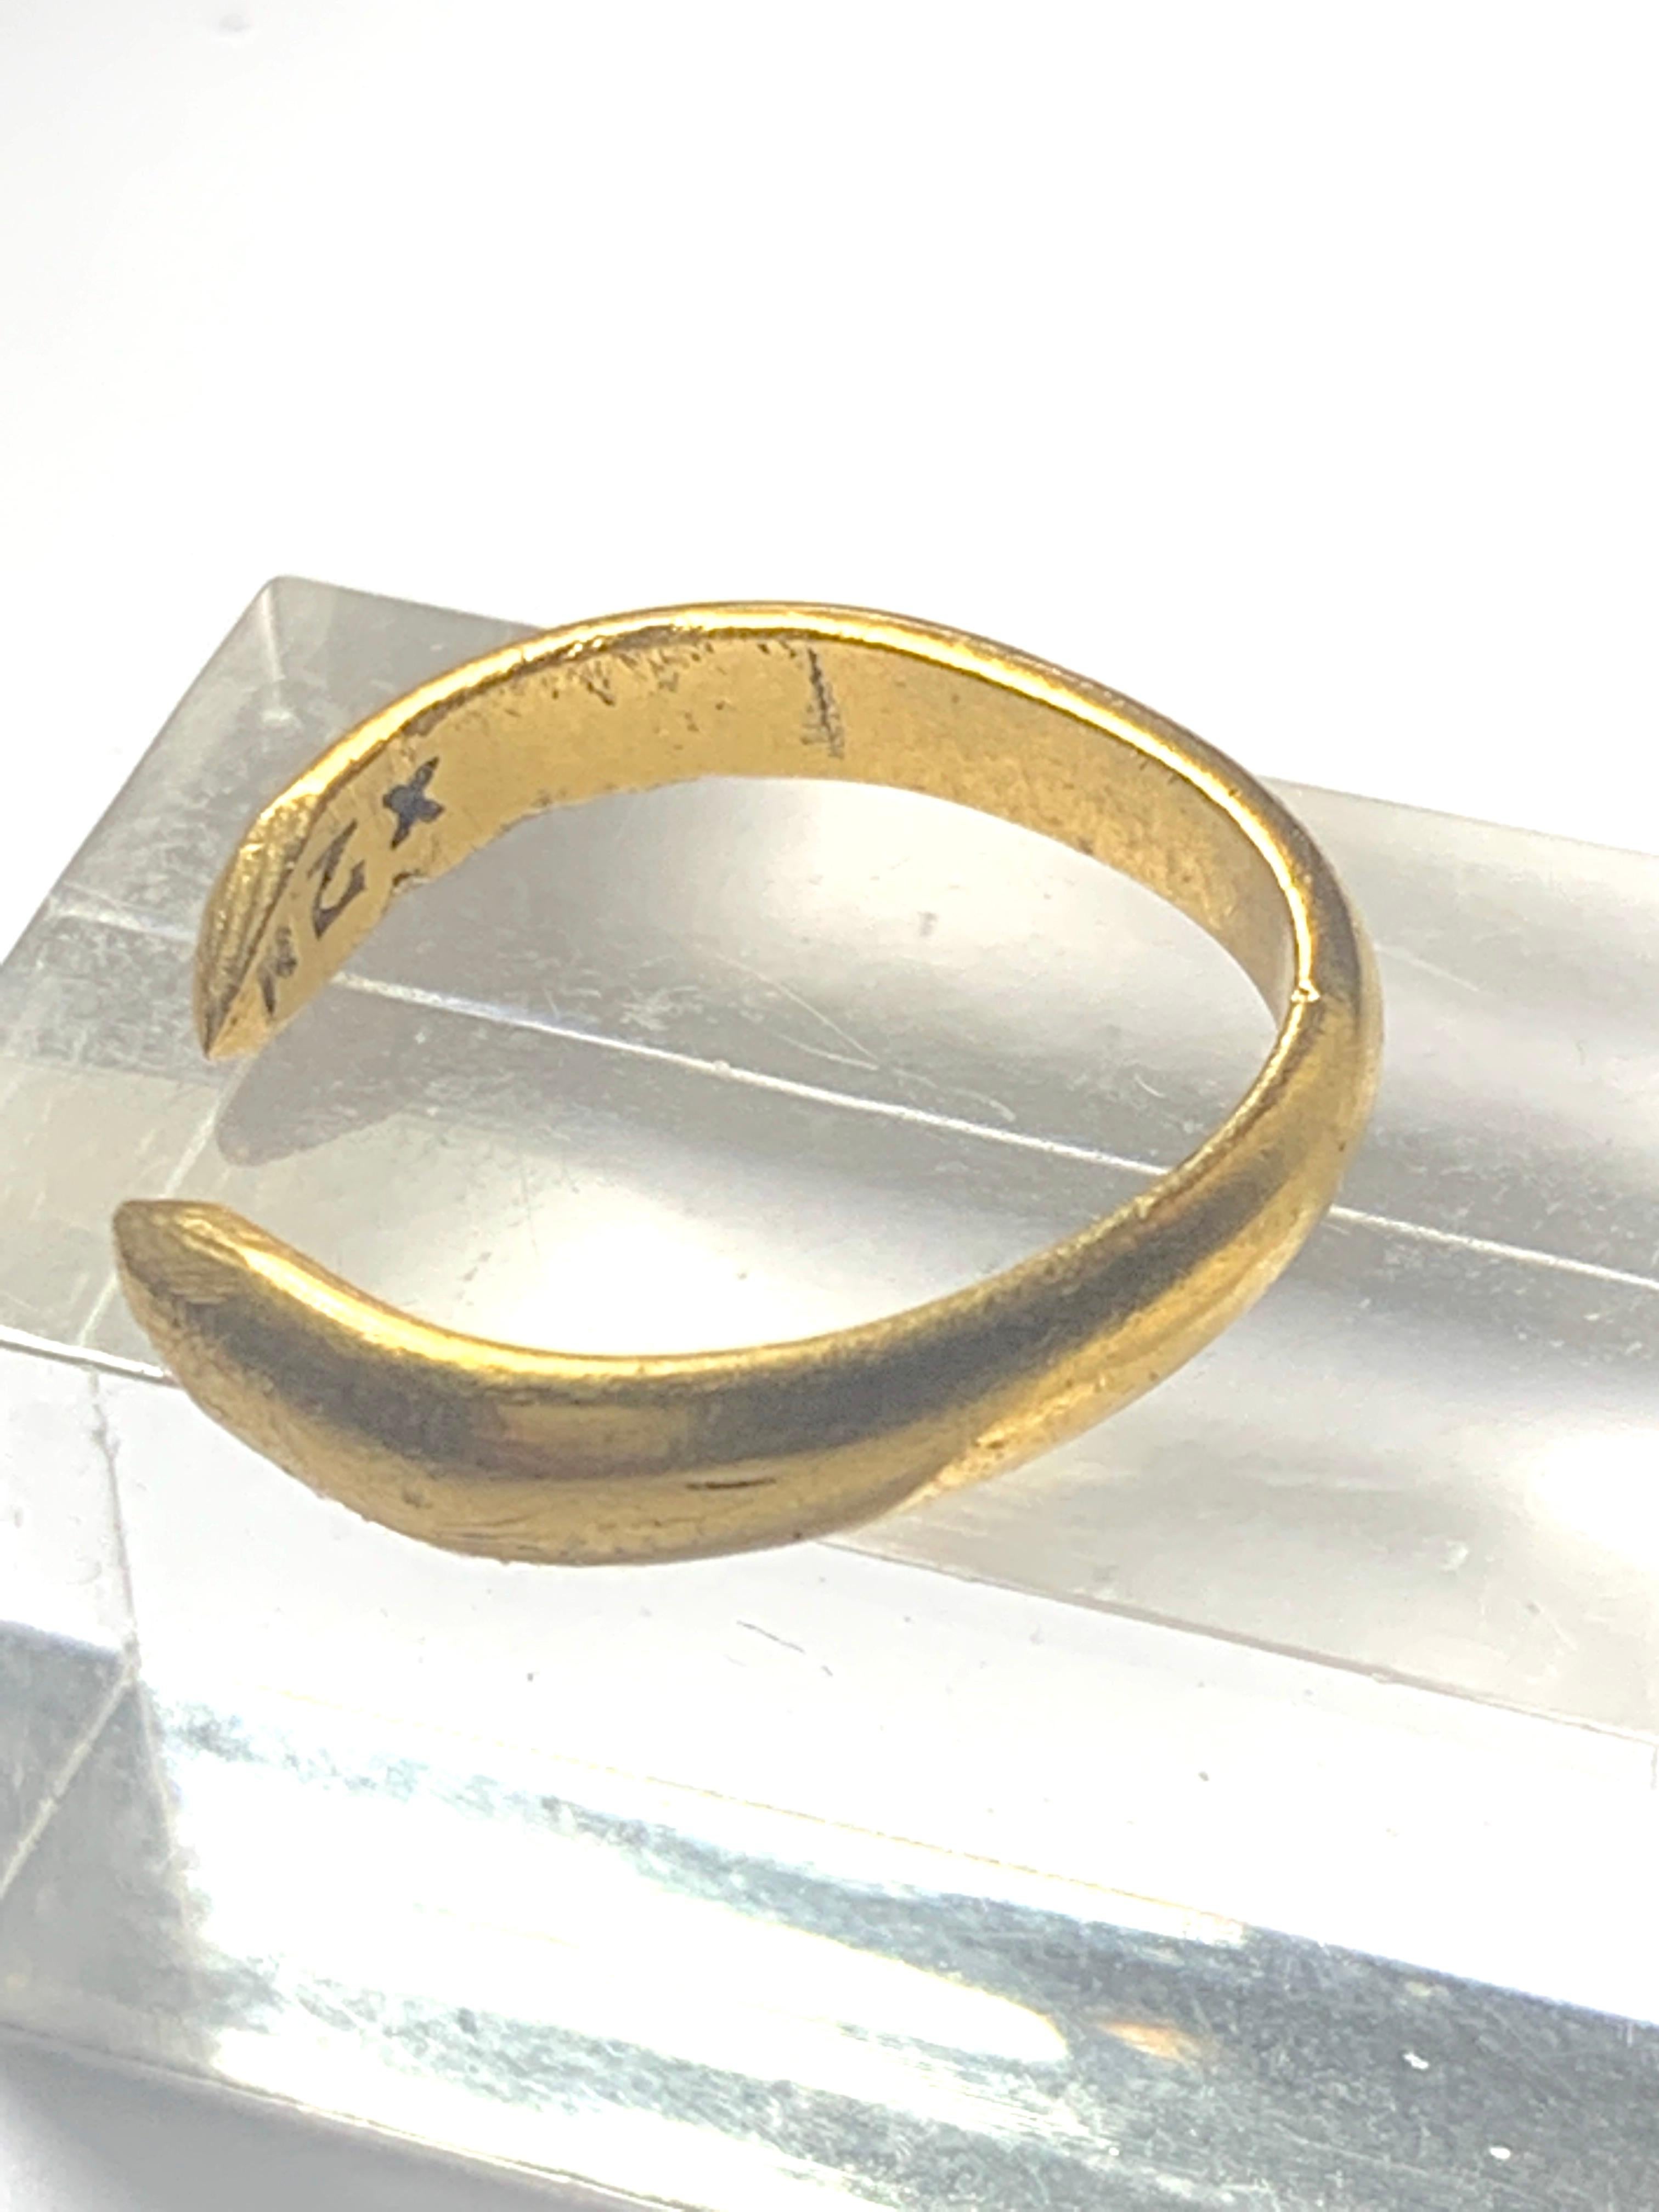 22ct Gold open band ring
with shaped ends
Fully Hallmarked (British) dated 1965
Inner diameter is 16mm
The ring is not round - so difficult to state a size
I'd assume  K 1/2 - L
Weight 4.8 grams
Please note this appears to be a reshaped band ring -